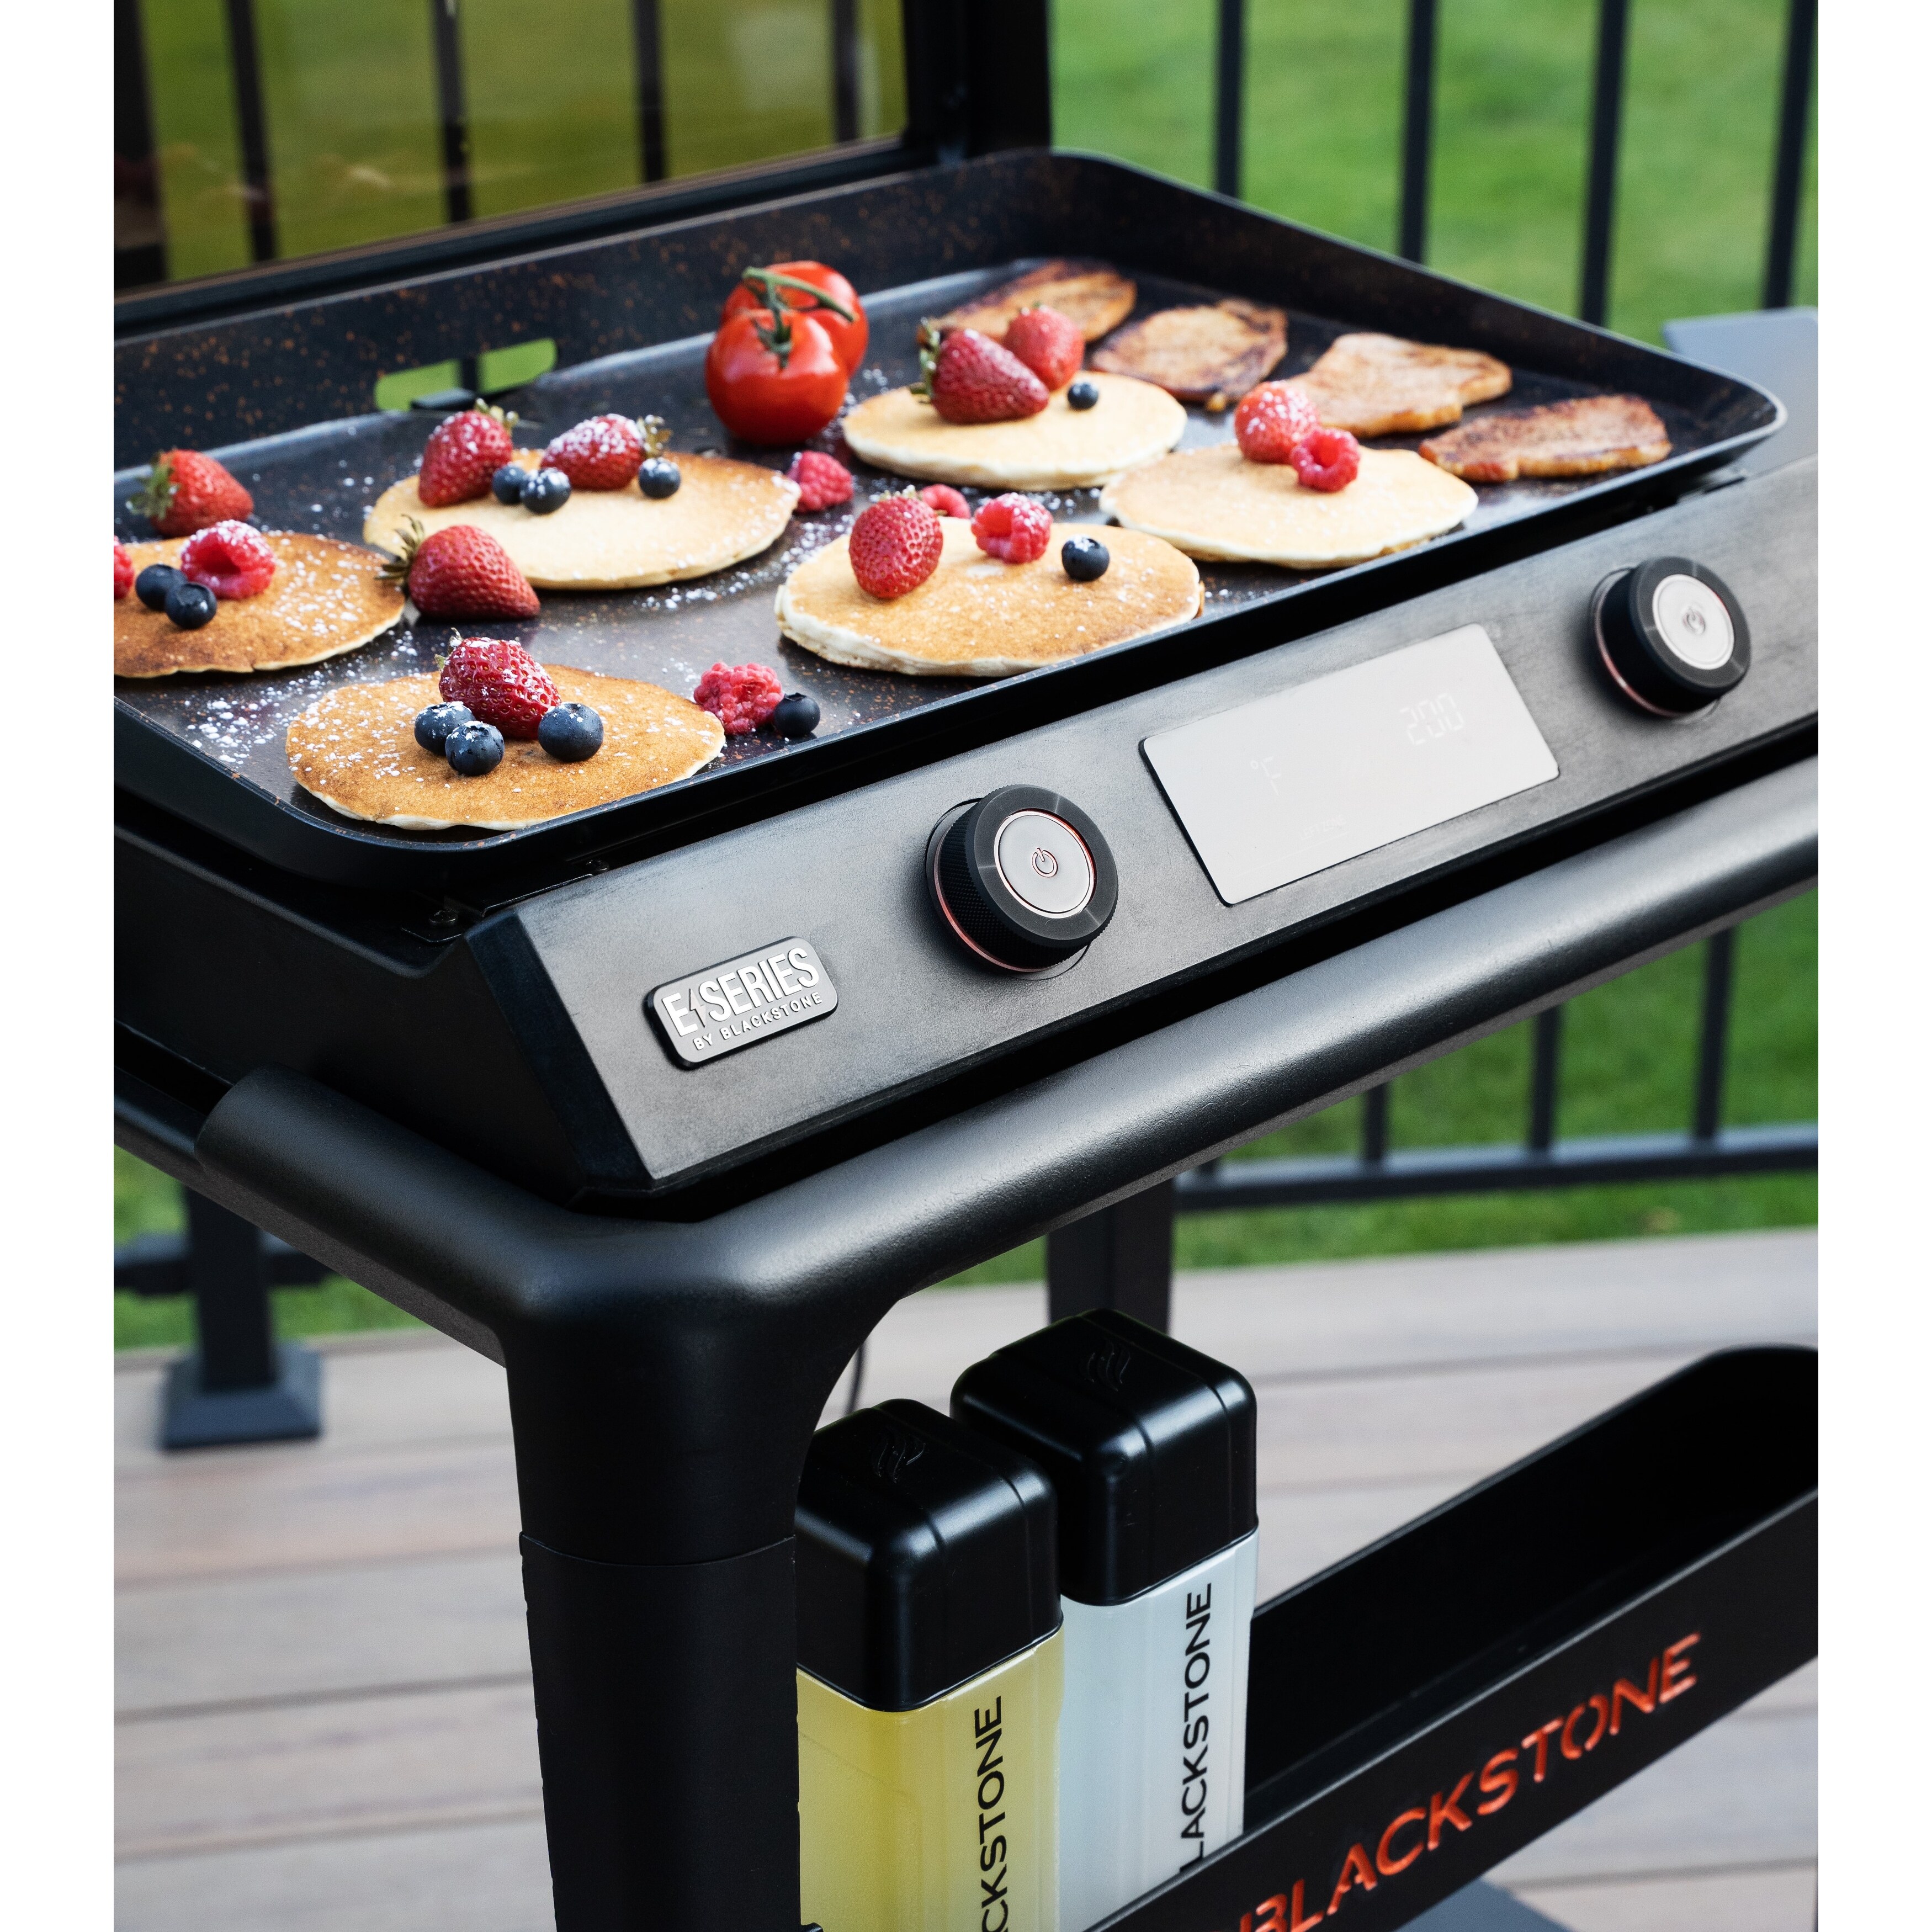 Blackstone E-Series 22 Electric Tabletop Griddle with Prep Cart